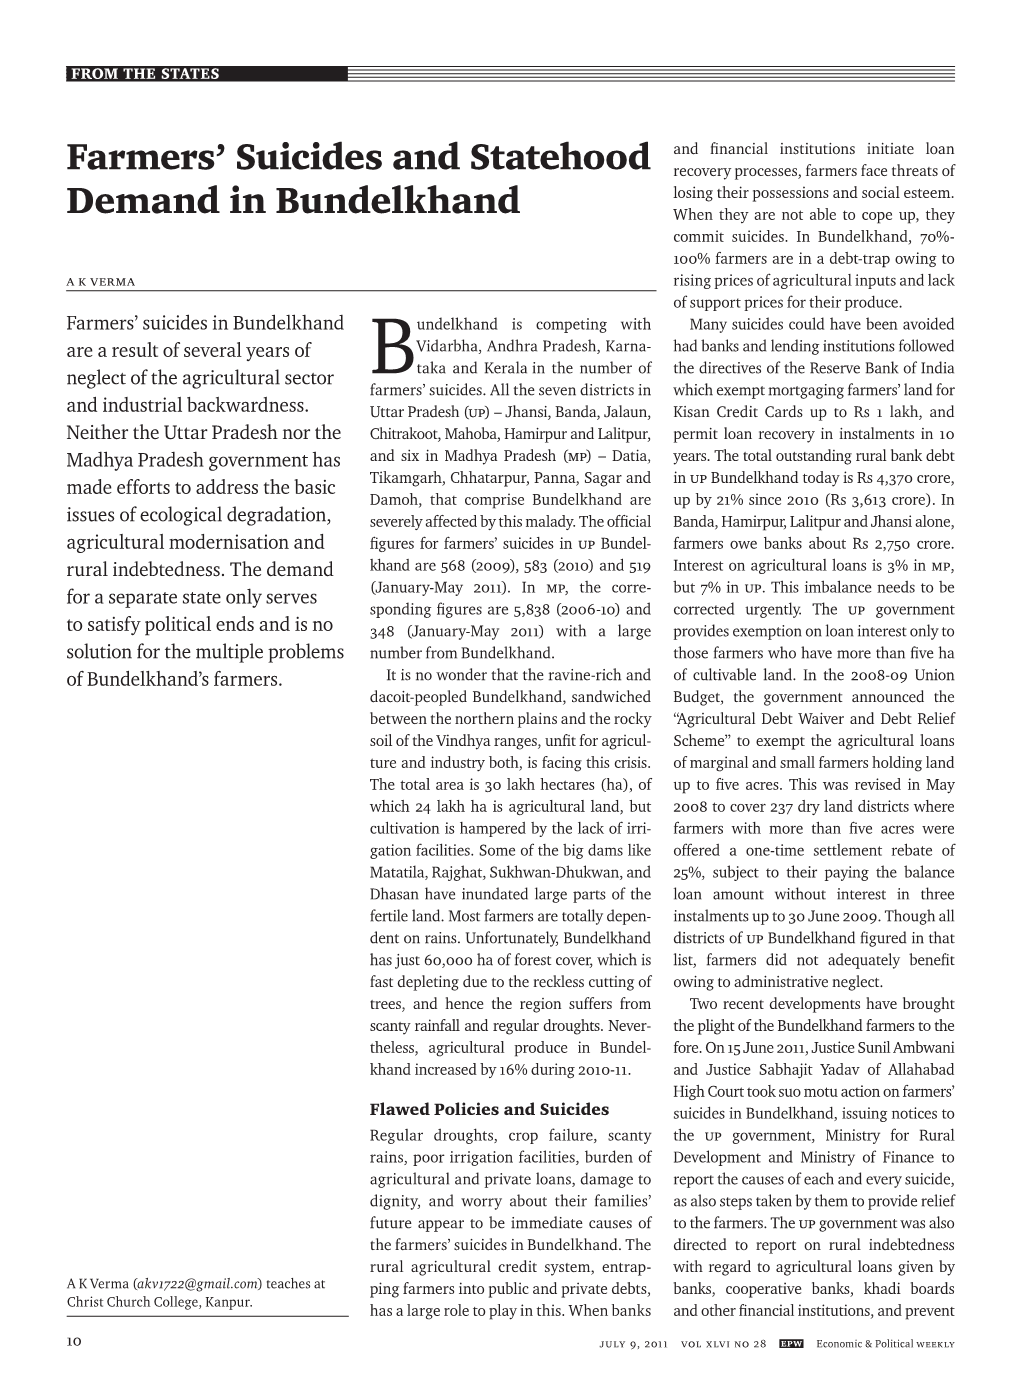 Farmers' Suicides and Statehood Demand in Bundelkhand